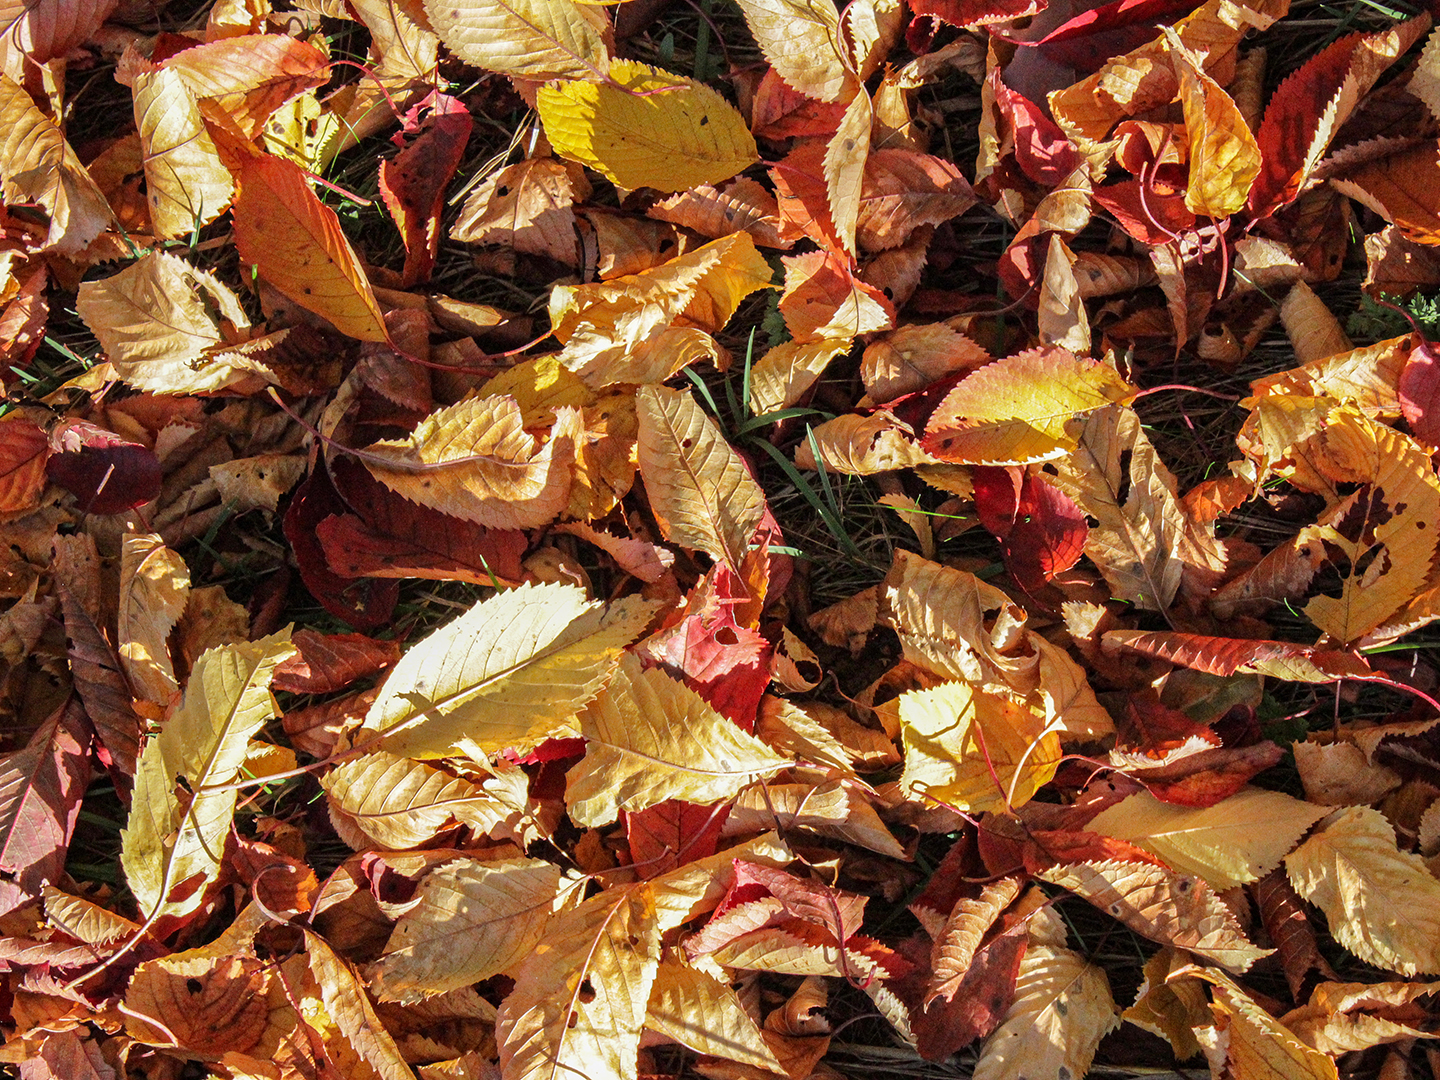 Raw material for the biogenic additives: autumn leaves.